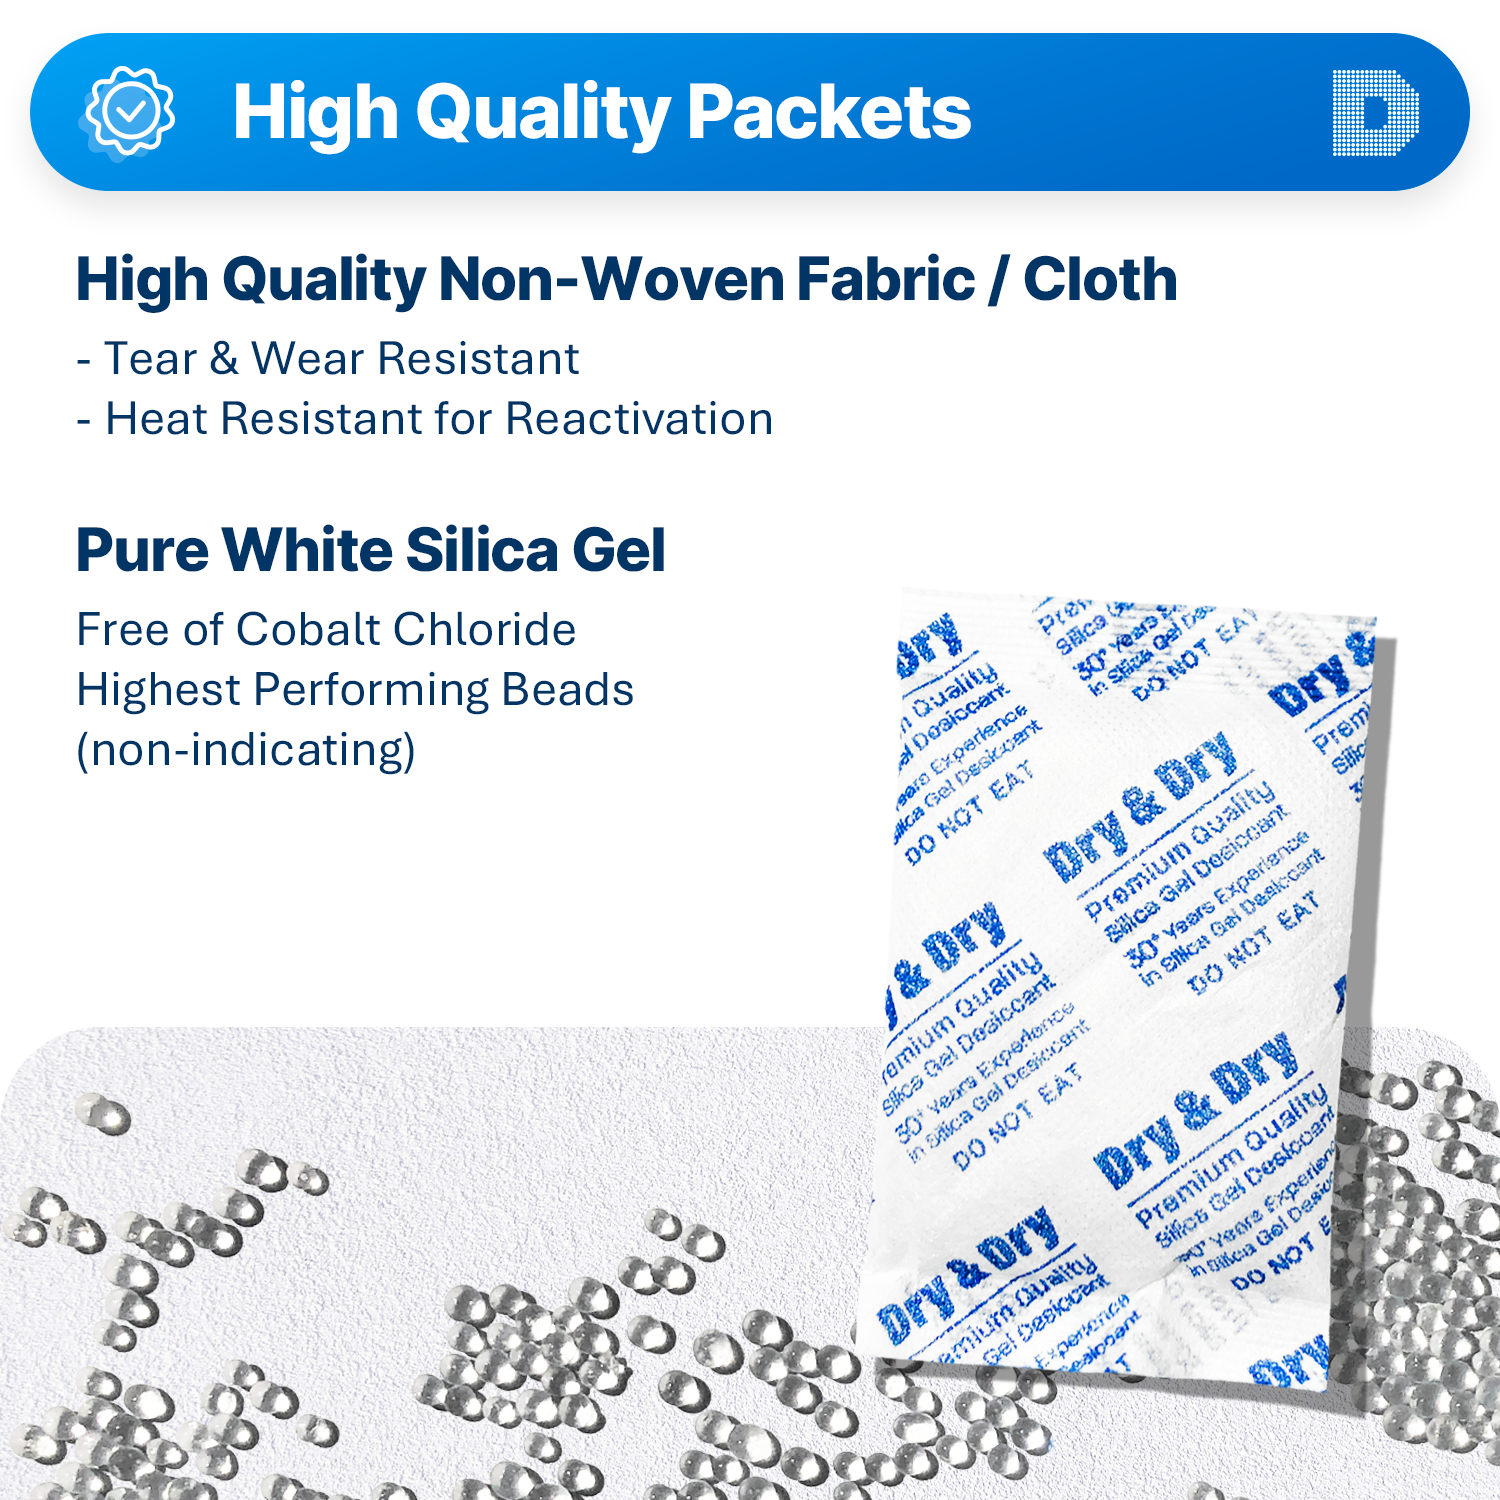 30 gram [600 Packets] "Dry & Dry" Premium Silica Gel Desiccant Packets - Rechargeable Non-Woven Fabric (Cloth)